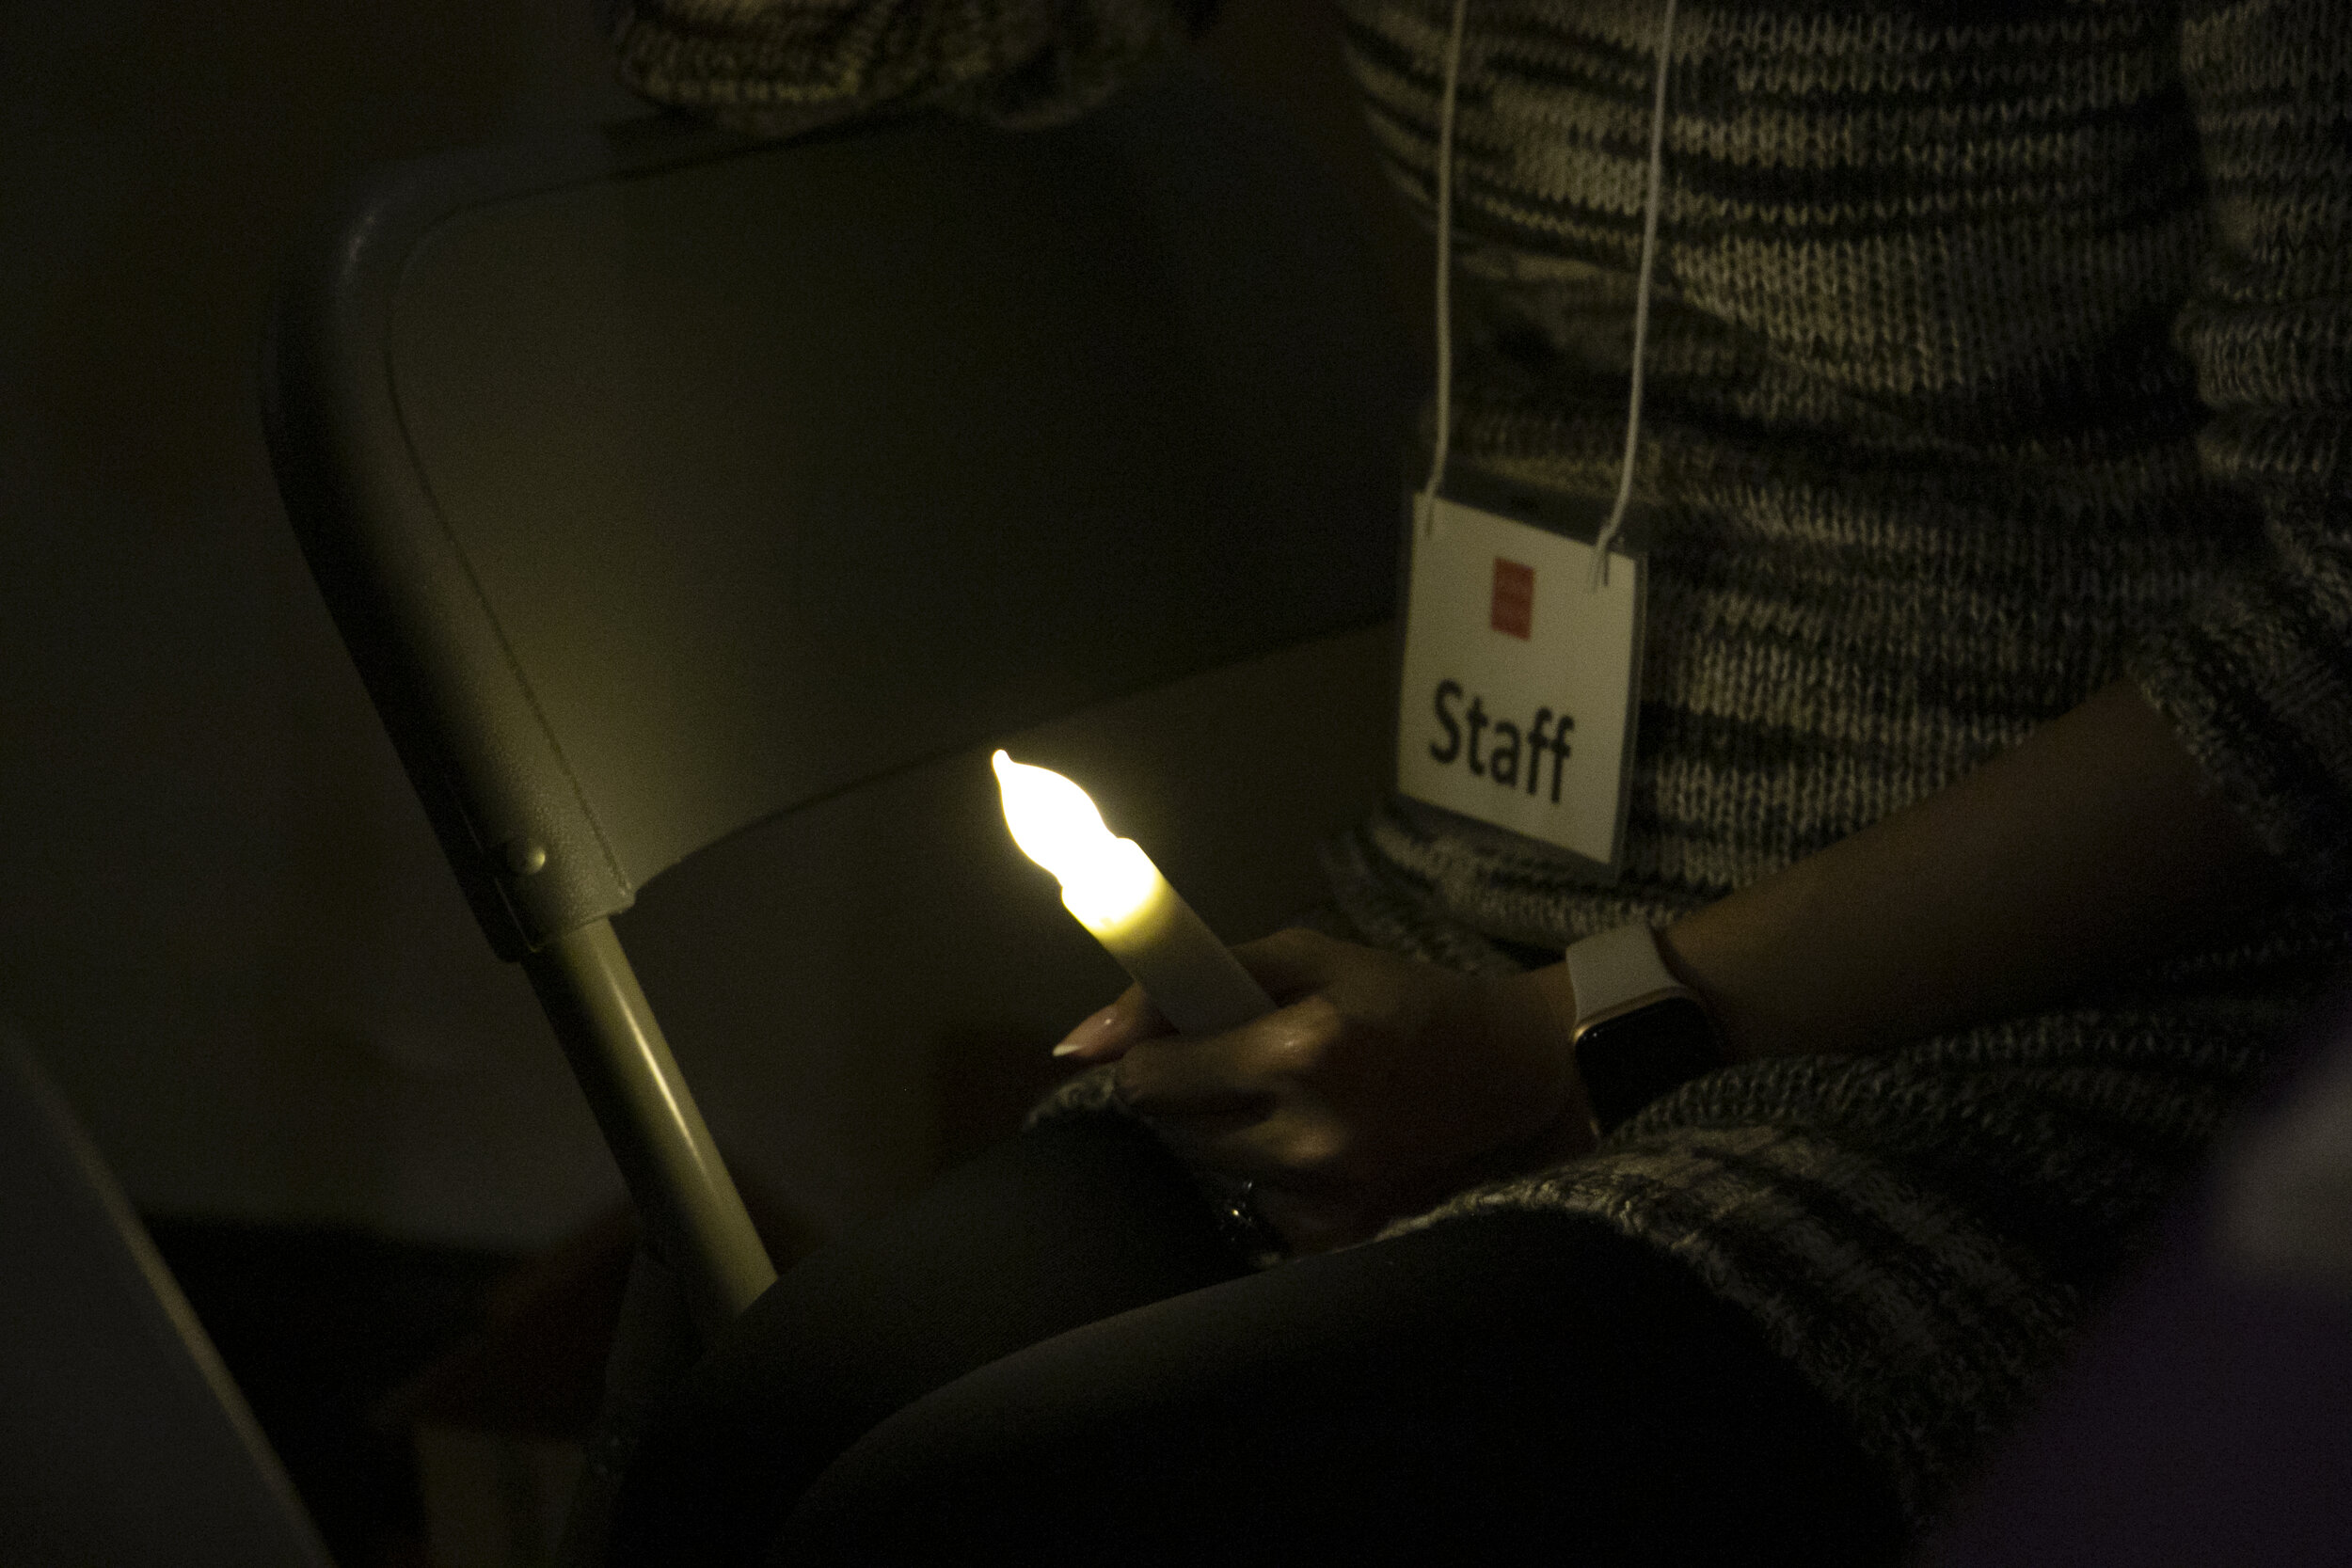  A staff member held a candle at the event. Photo by Carolyn Chen 